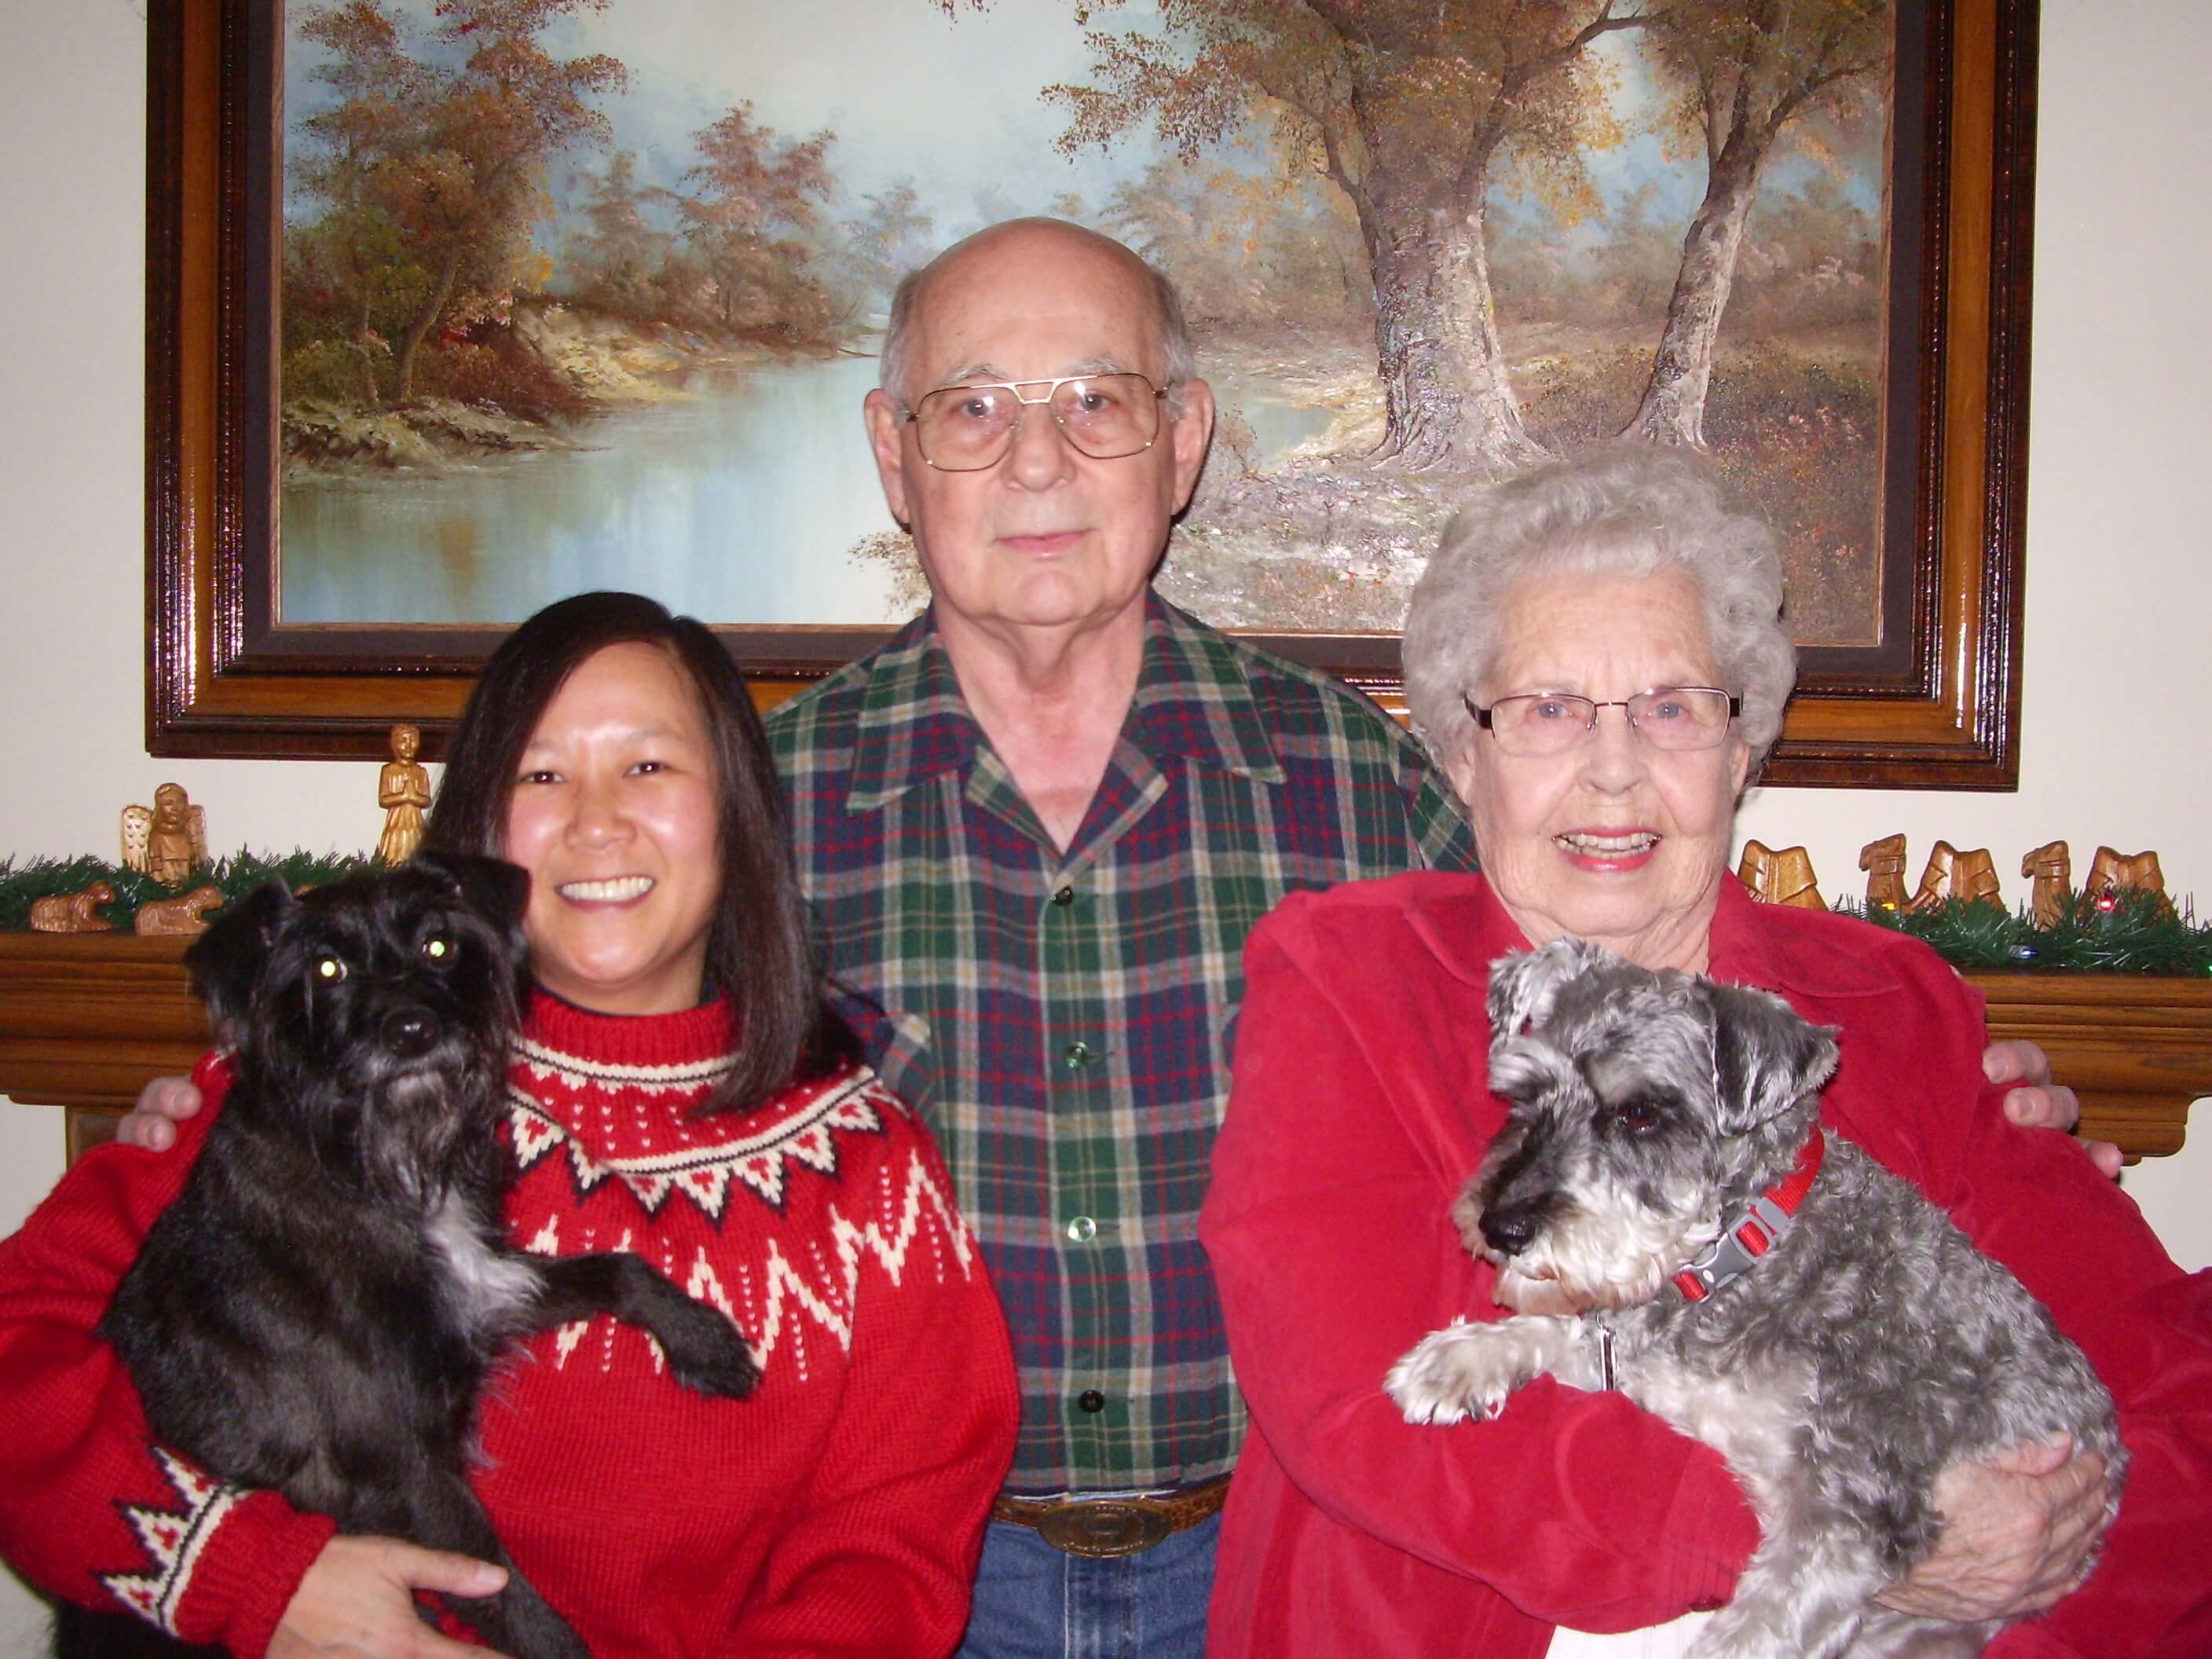 Three adults pose in red holiday sweaters and hold two small dogs.